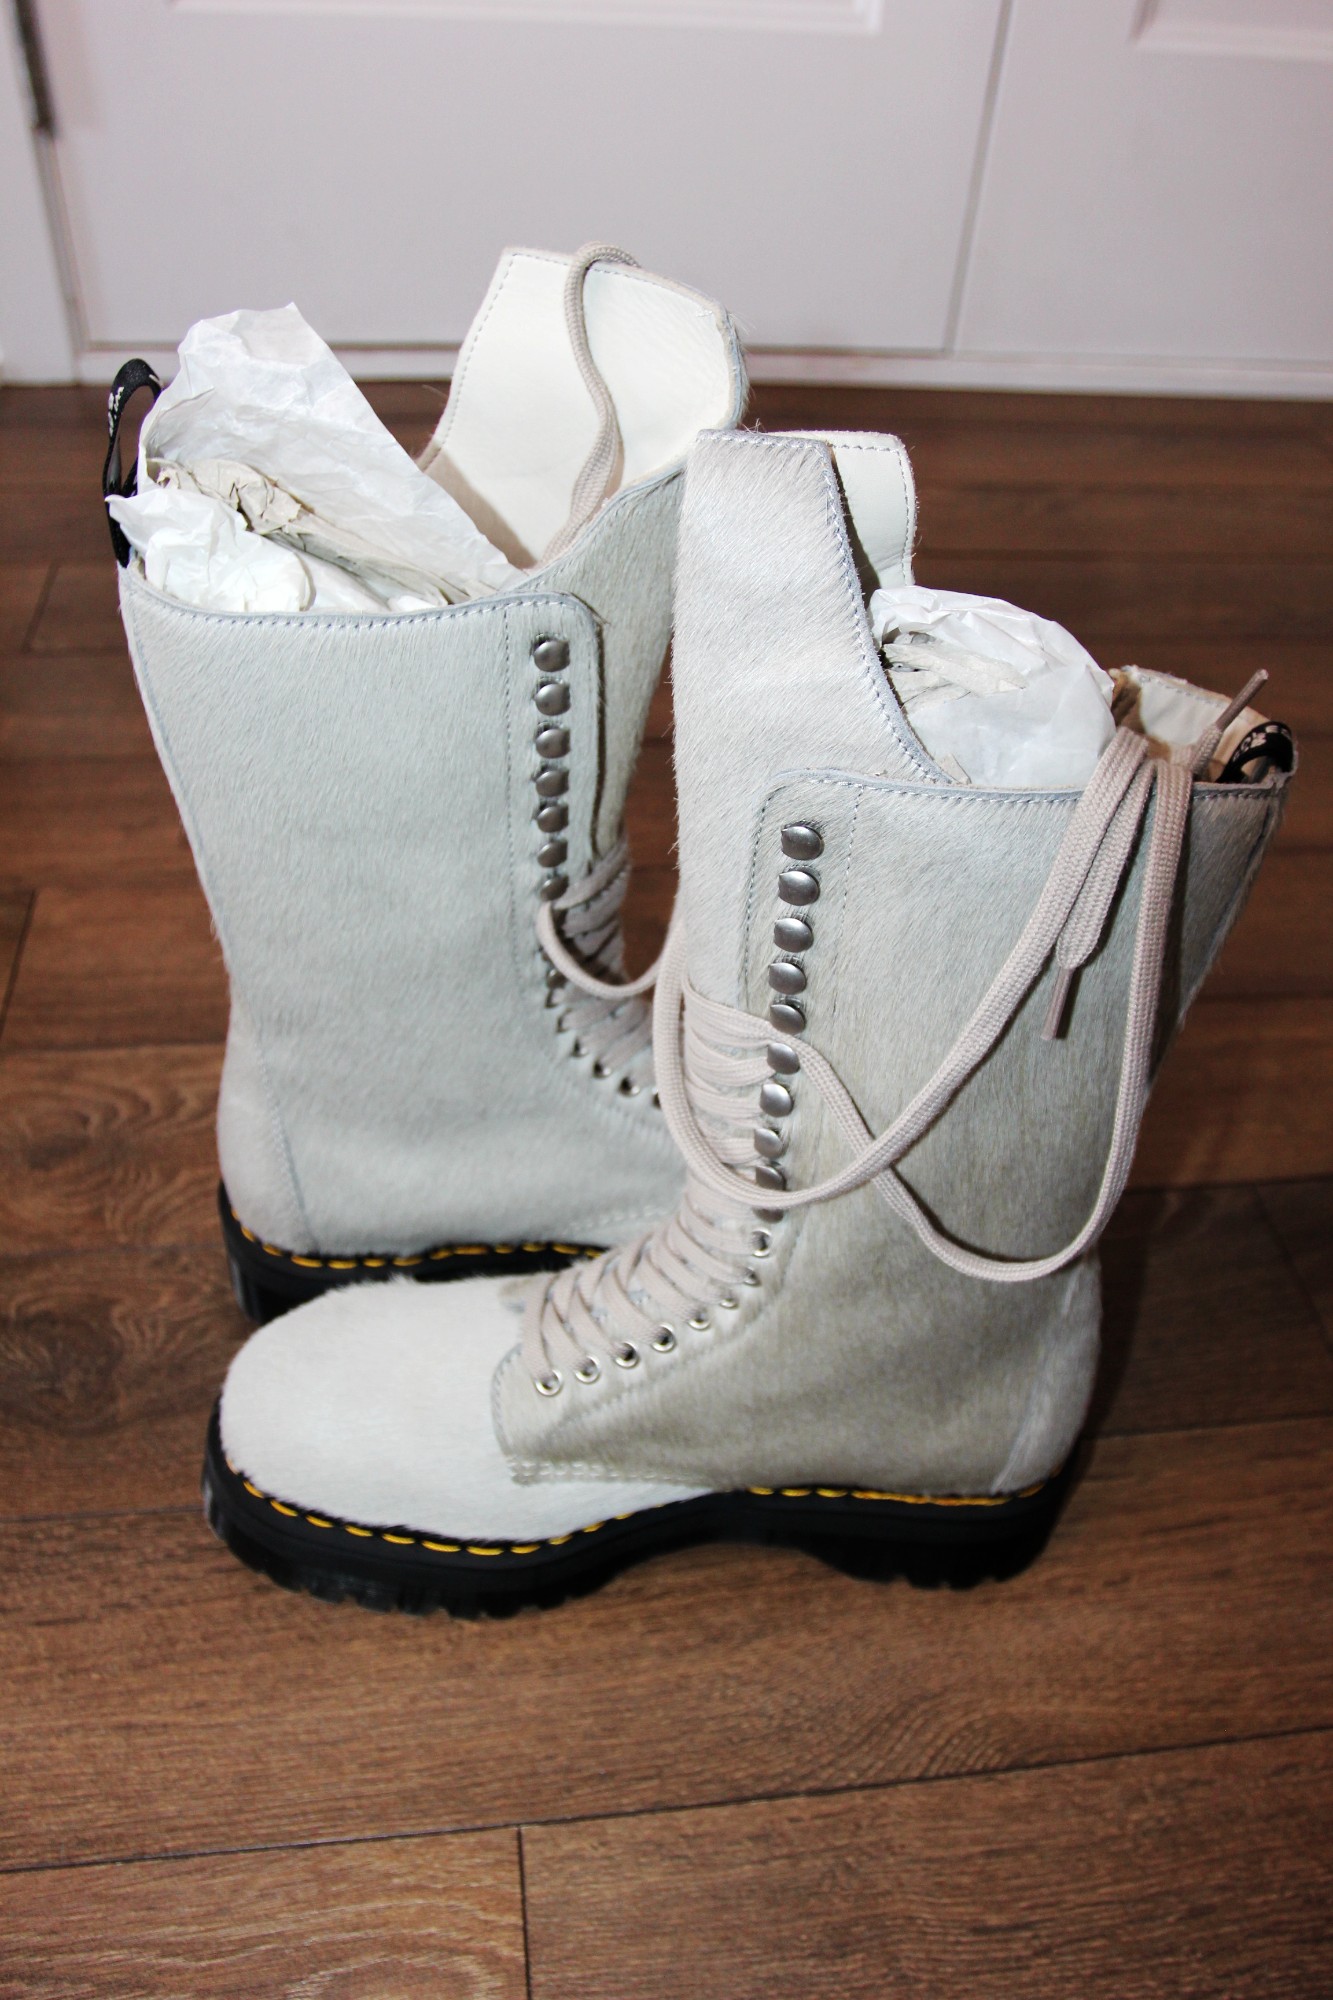 BNWT SS23 RICK OWENS x DR.MARTENS 1918 HAIR ON LUX BOOTS 43 - 4